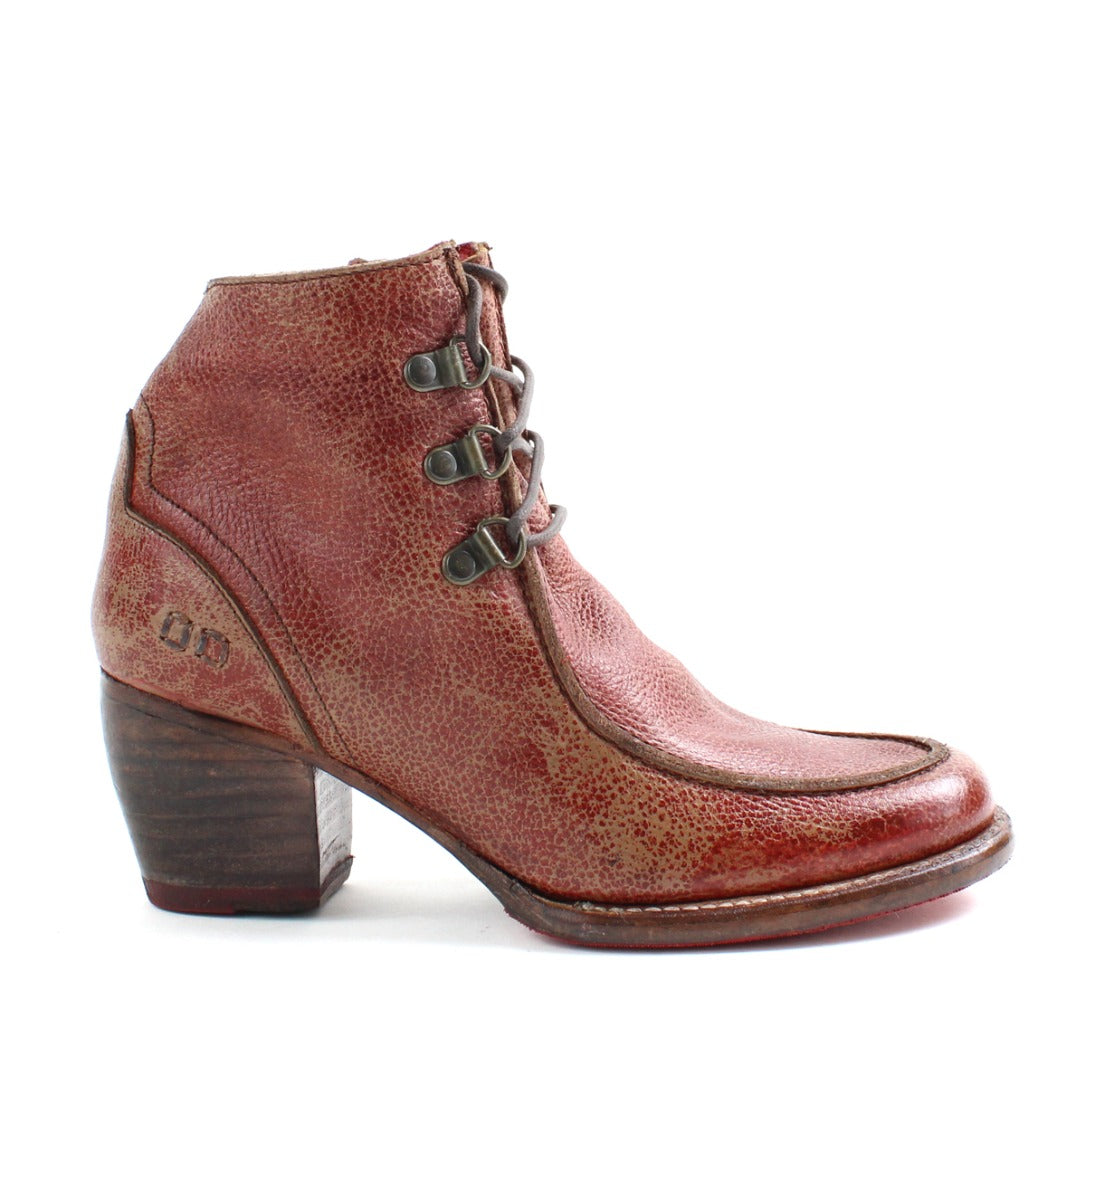 A women's distressed red ankle boot with a wooden heel called the Mage by Bed Stu.